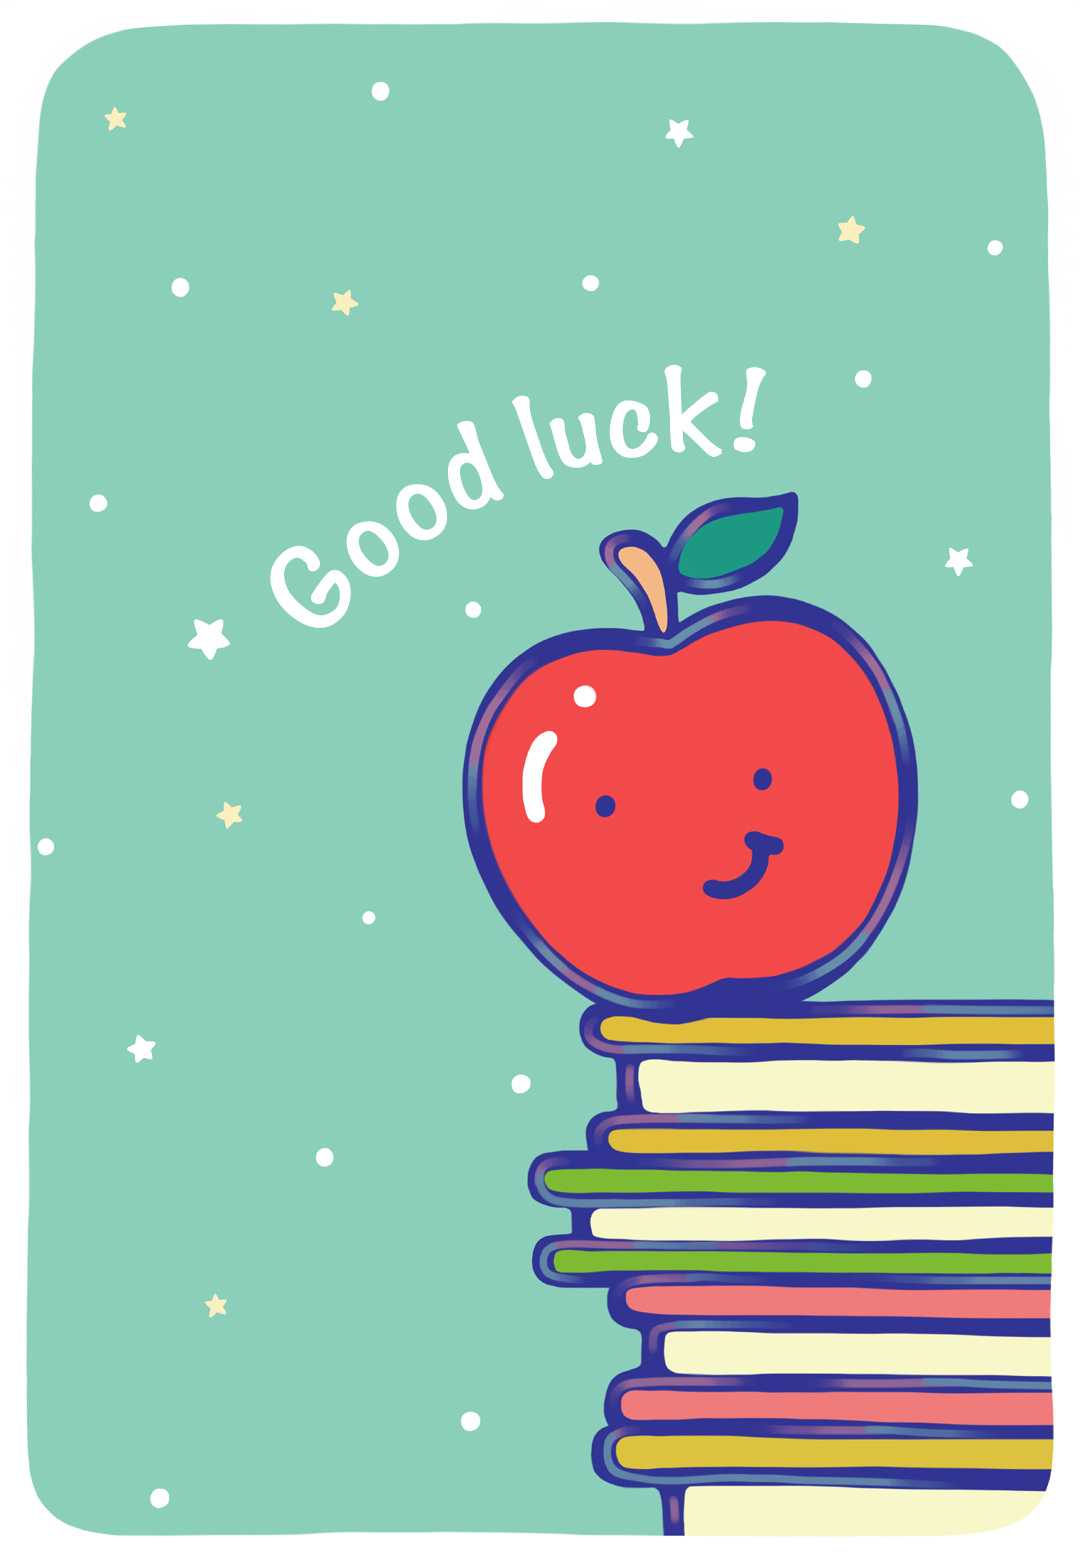 May Hard Work Pay Off – Good Luck Card (Free) | Greetings Island In Good Luck Card Templates